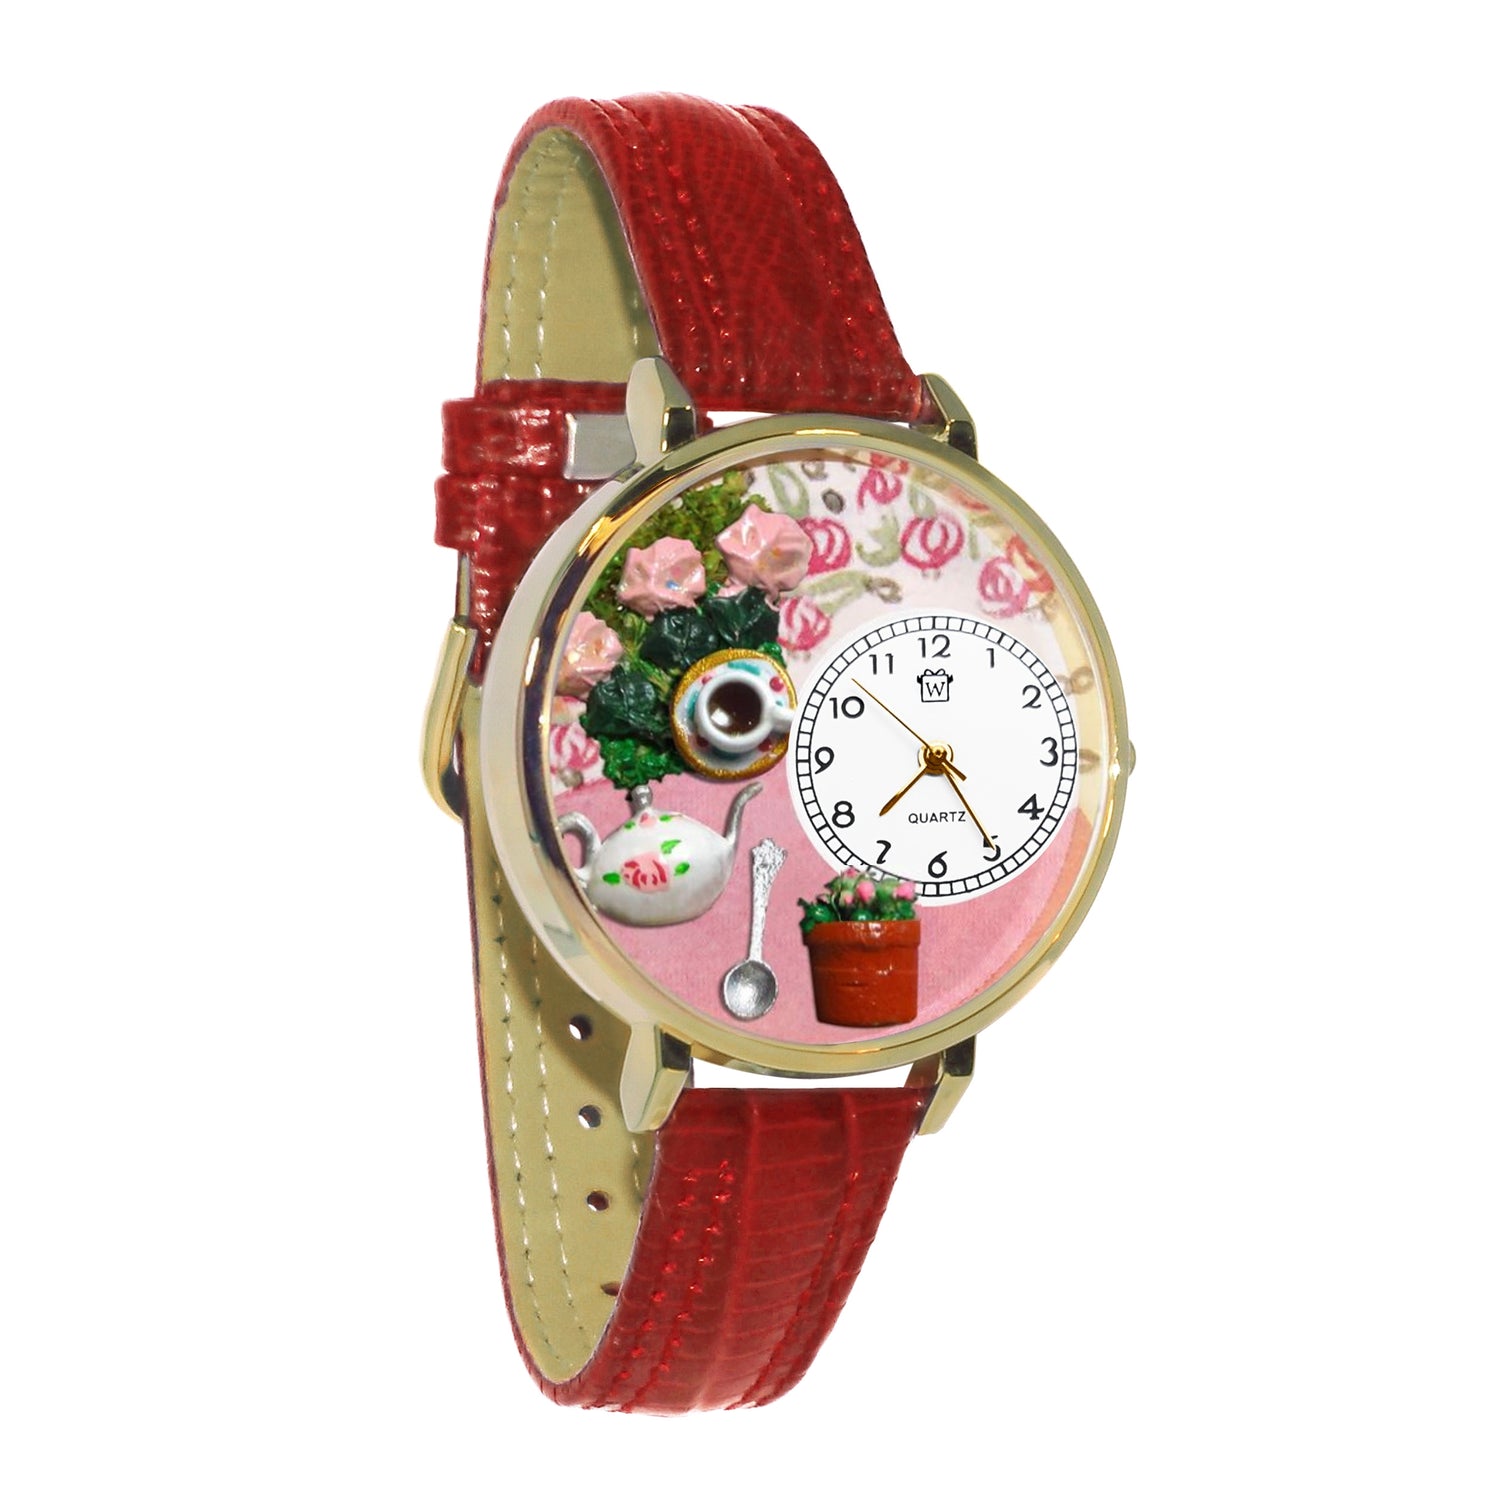 Whimsical Gifts | Tea Roses 3D Watch Large Style | Handmade in USA | Hobbies & Special Interests | Food & Wine | Novelty Unique Fun Miniatures Gift | Gold Finish Red Leather Watch Band